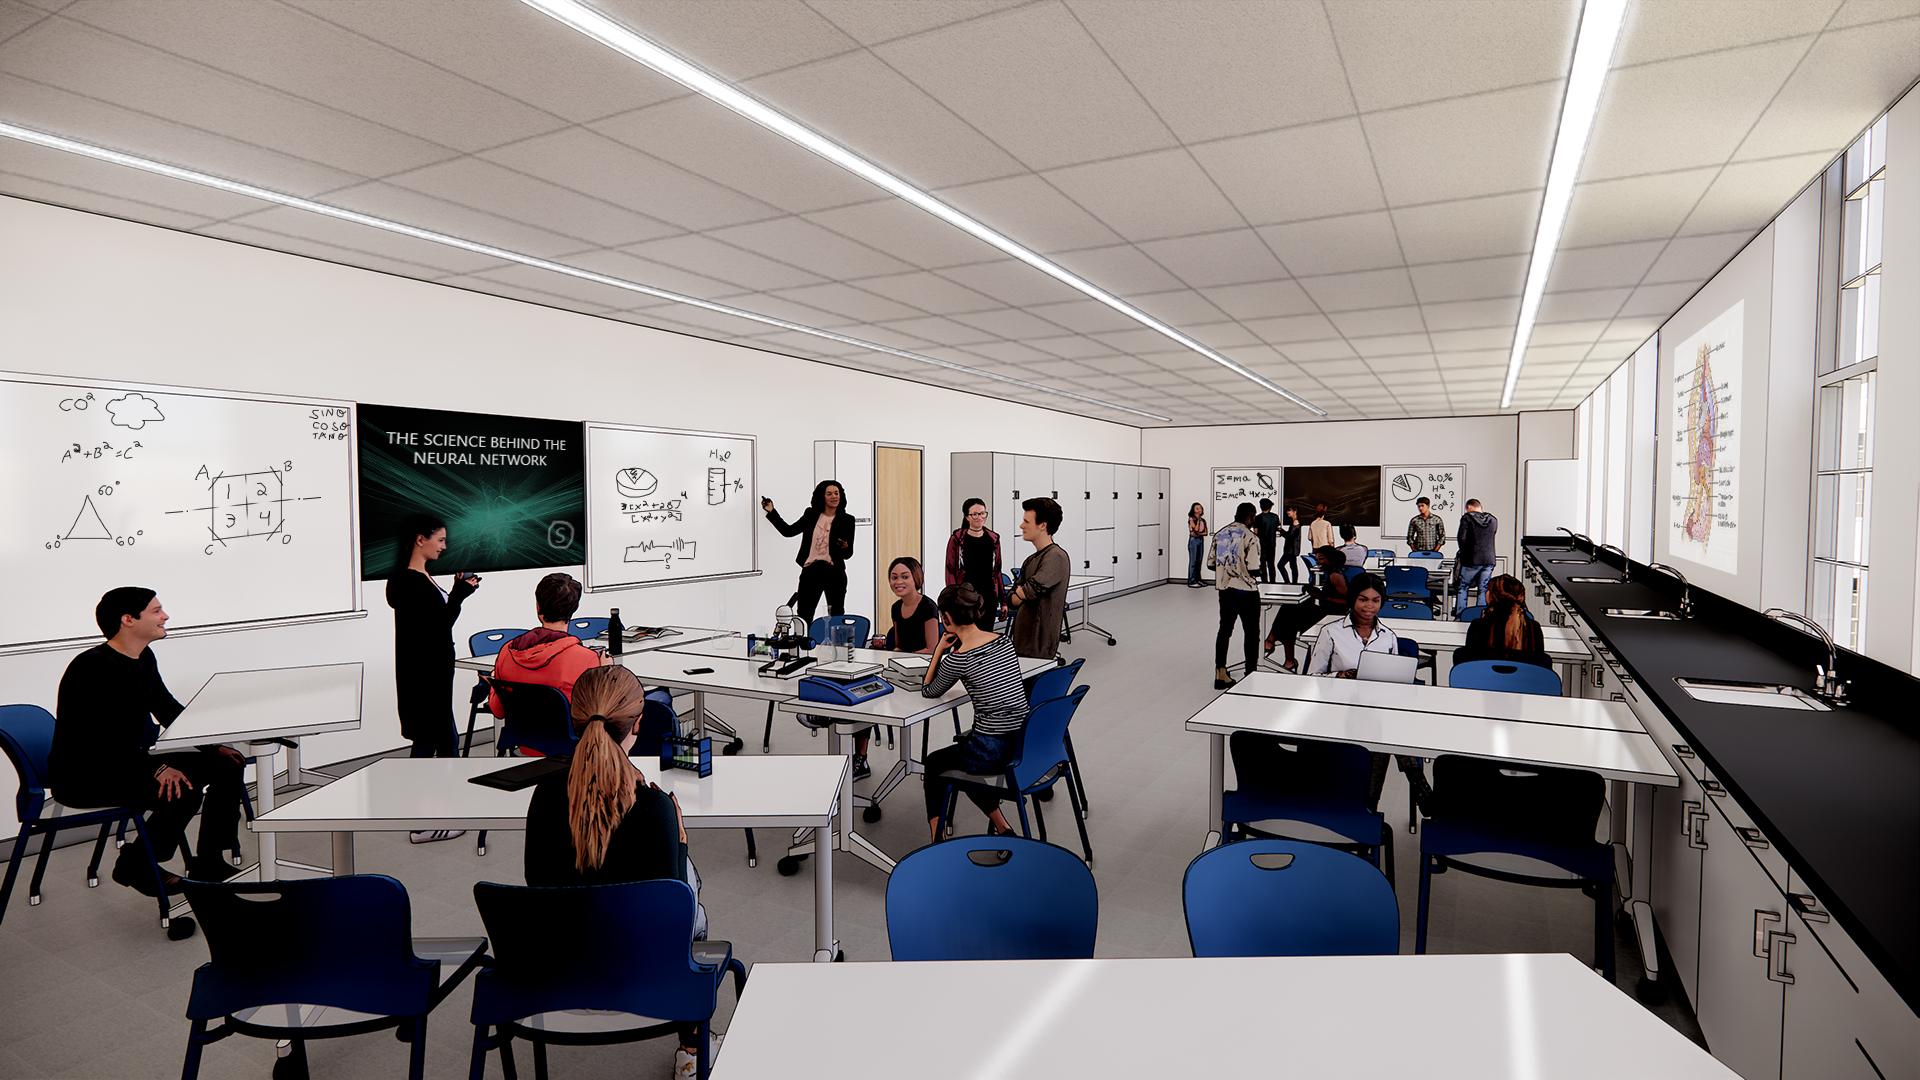 A rendering of the proposed changes to the 7th and 8th grade science rooms show the enhancements that will assist 21st Century learning opportunities.